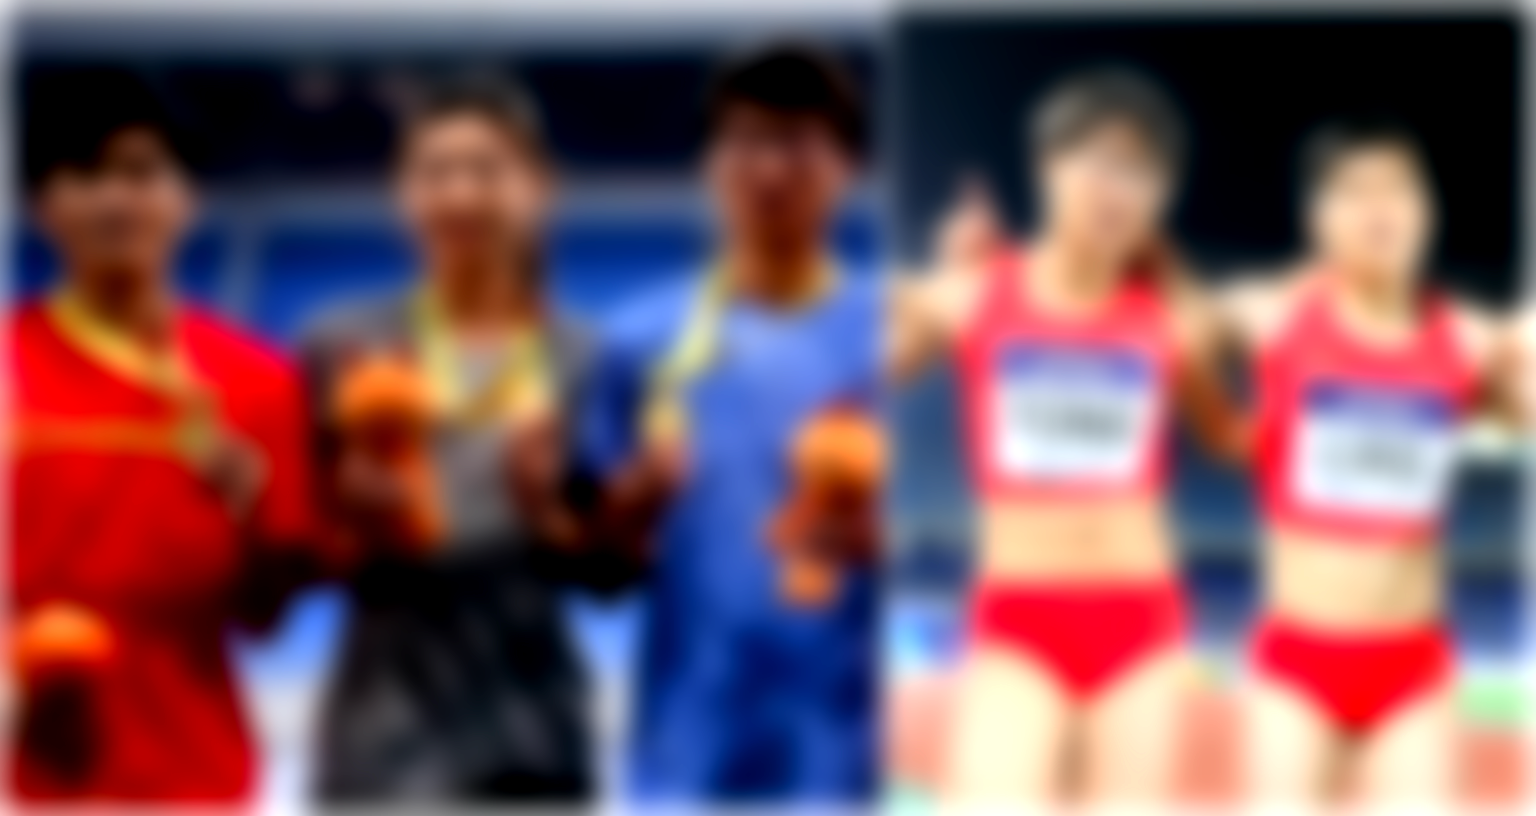 Chinese Female Track Runners Go Viral for ‘Looking Like Men’